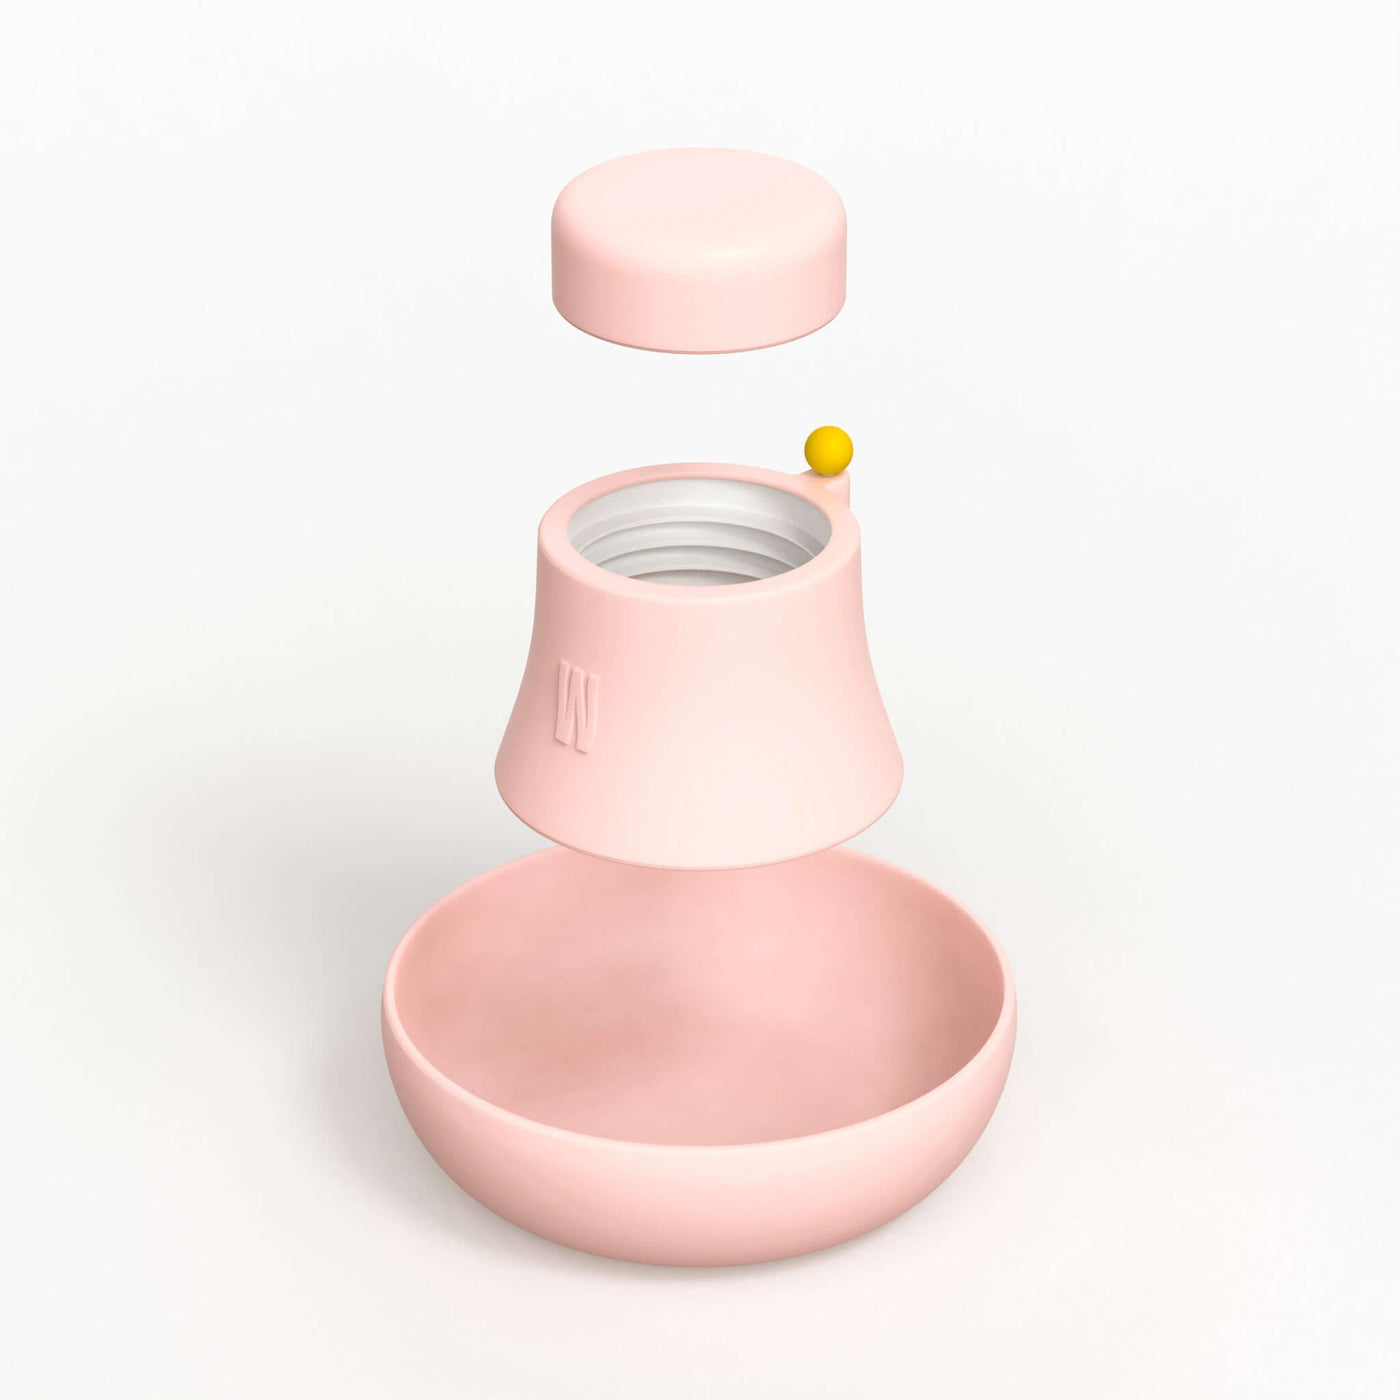 Rendered product photo of baby pink silicone covers with a yellow poker.